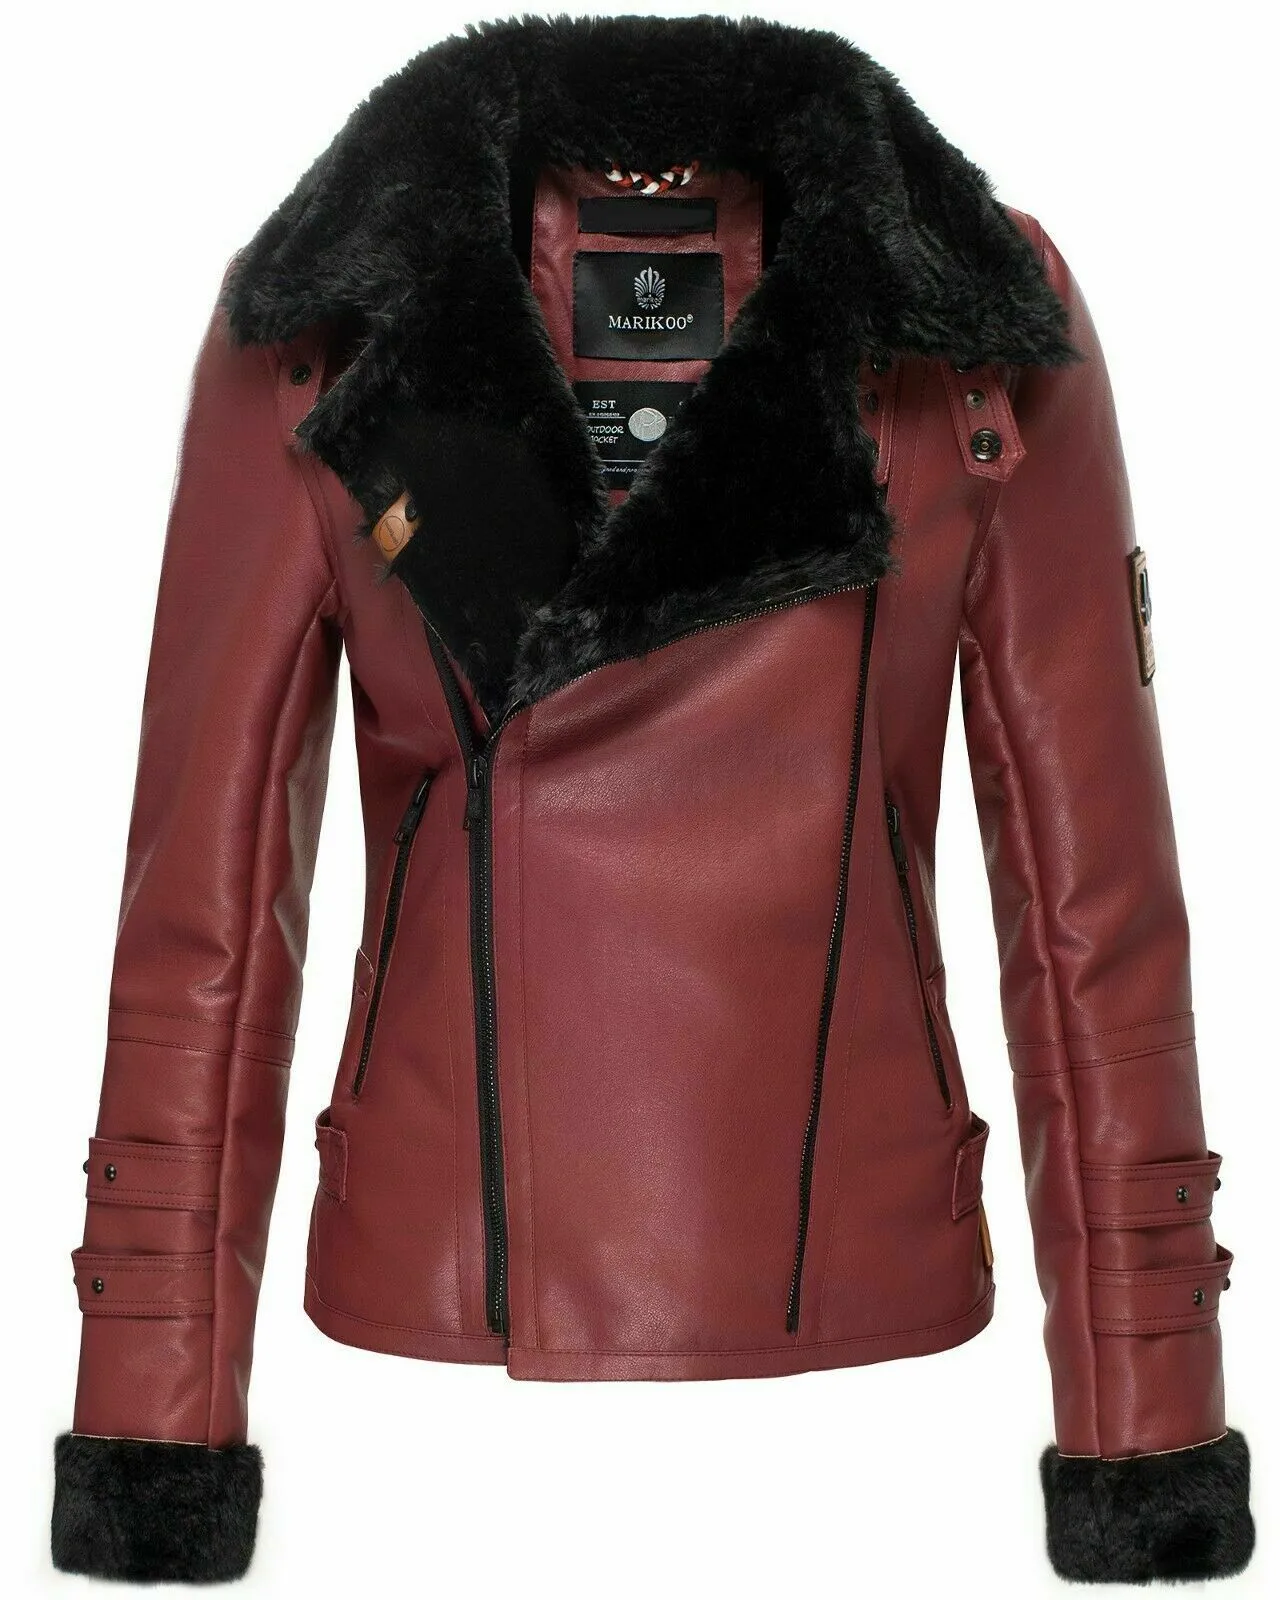 Women's fall/winter jacket with faux leather lining motorcycle jacket